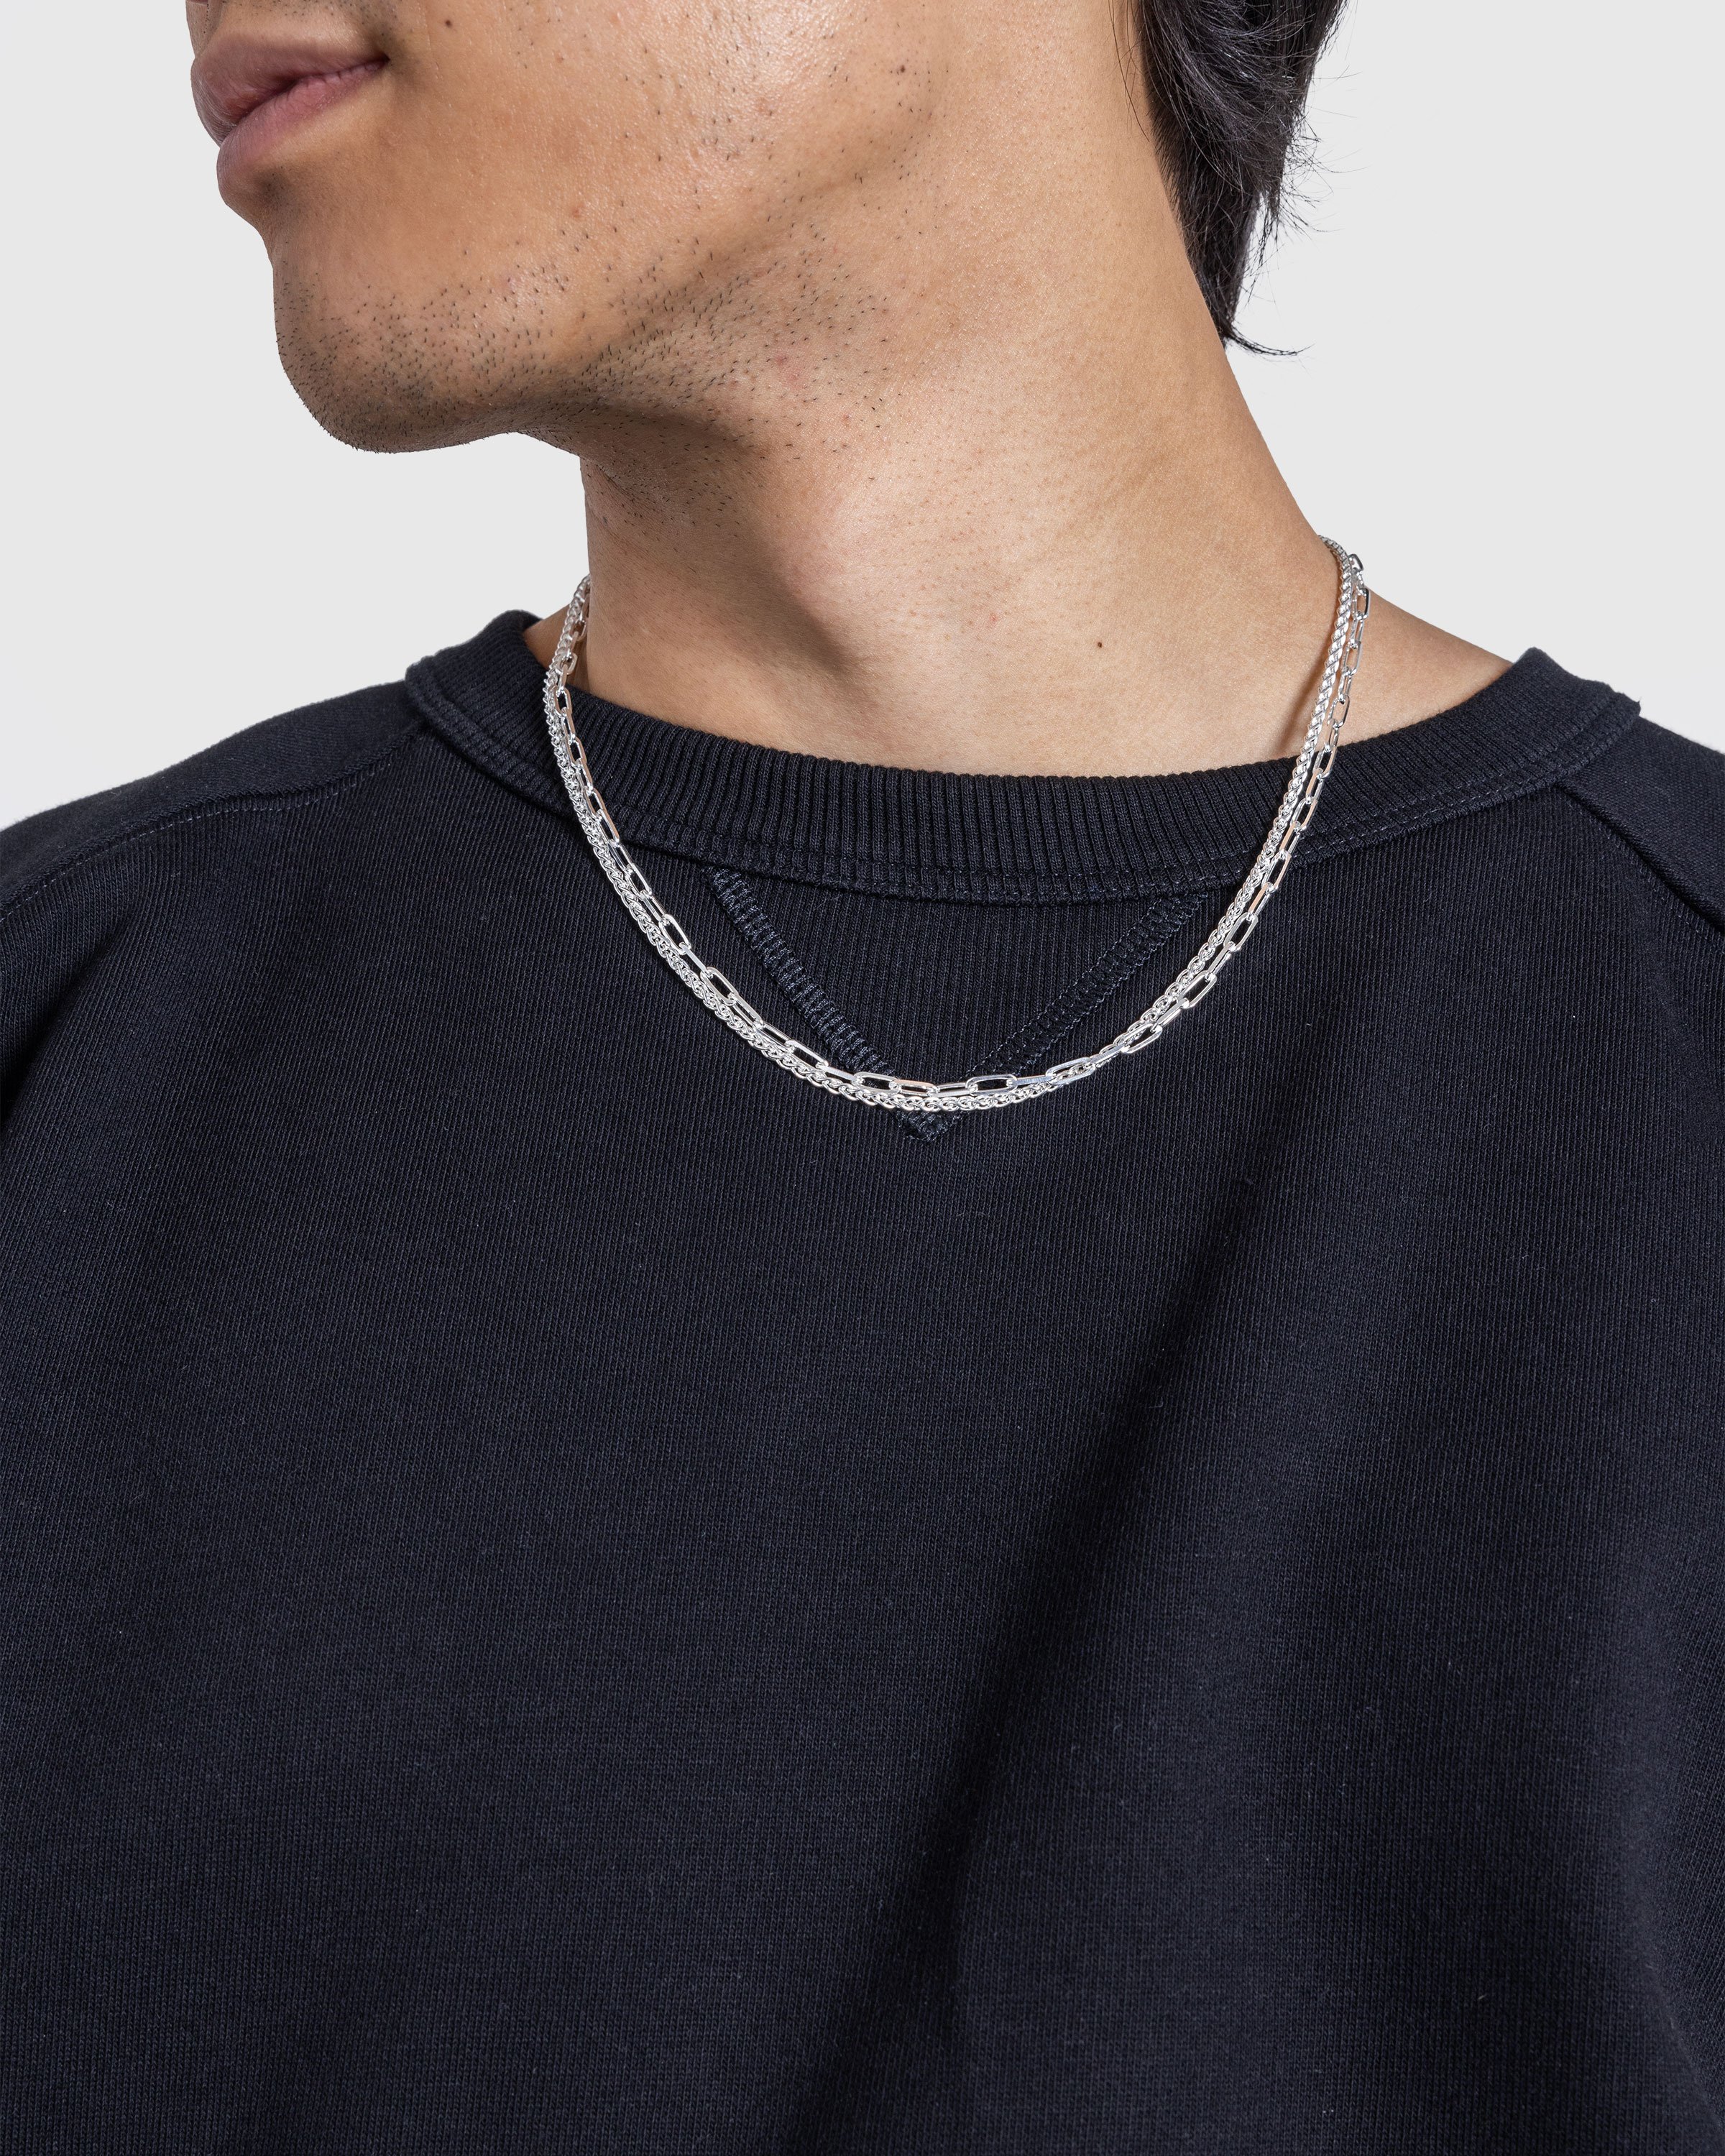 Hatton Labs - Rope Chain Silver - Accessories - Silver - Image 2